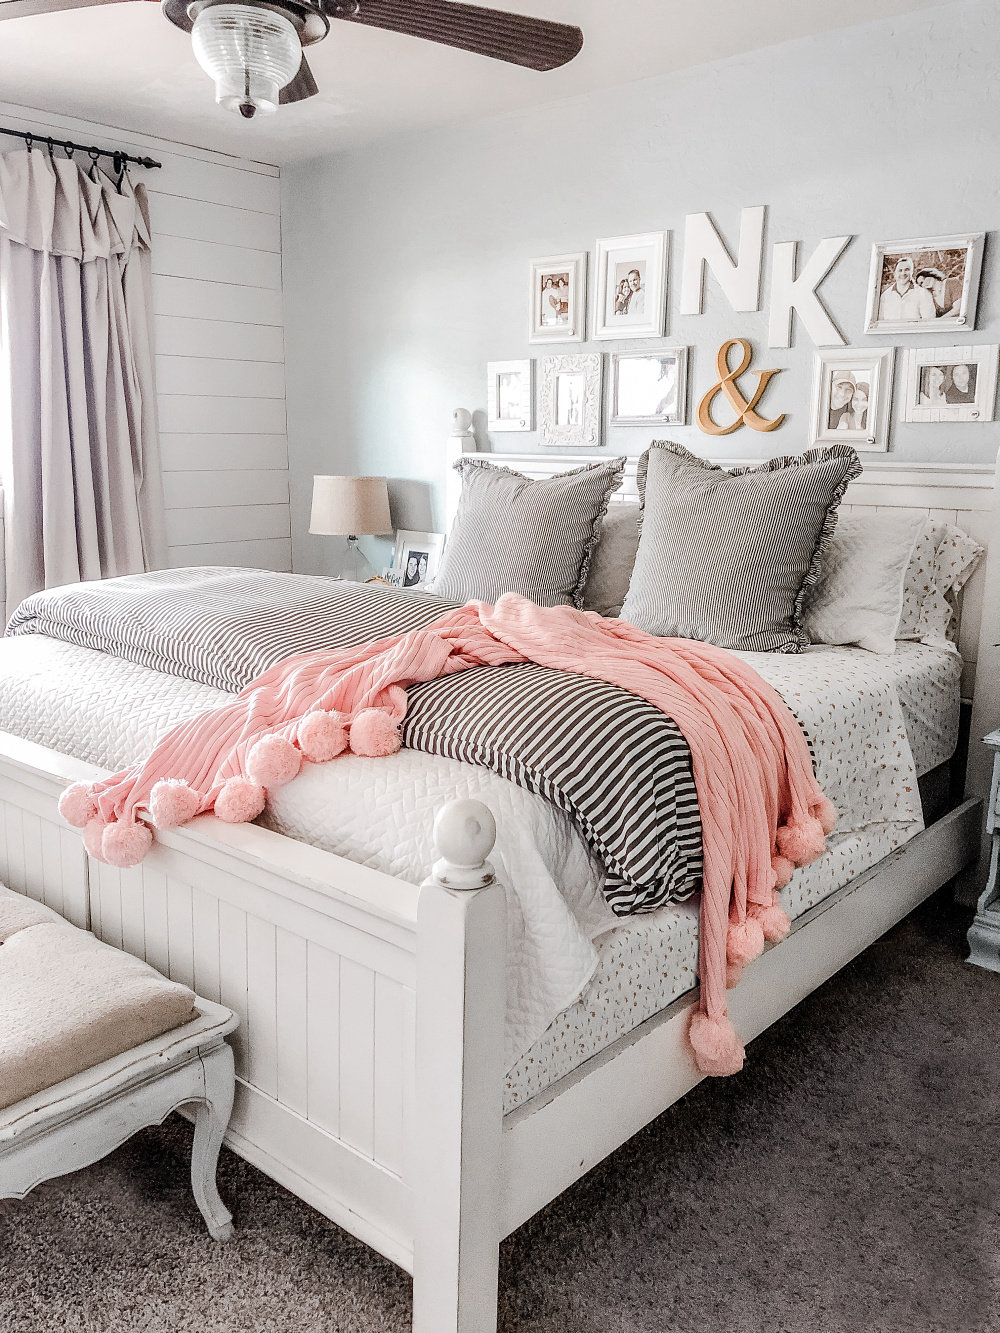 How to layer bedding using a coverlet and duvet. Love these cozy farmhouse bedding ideas. Create a master bedroom you can't wait to come home to! #masterbedding #farmhousebedding #seersuckerbedding #duvet #coverlet #howtostylebedding #homedecor